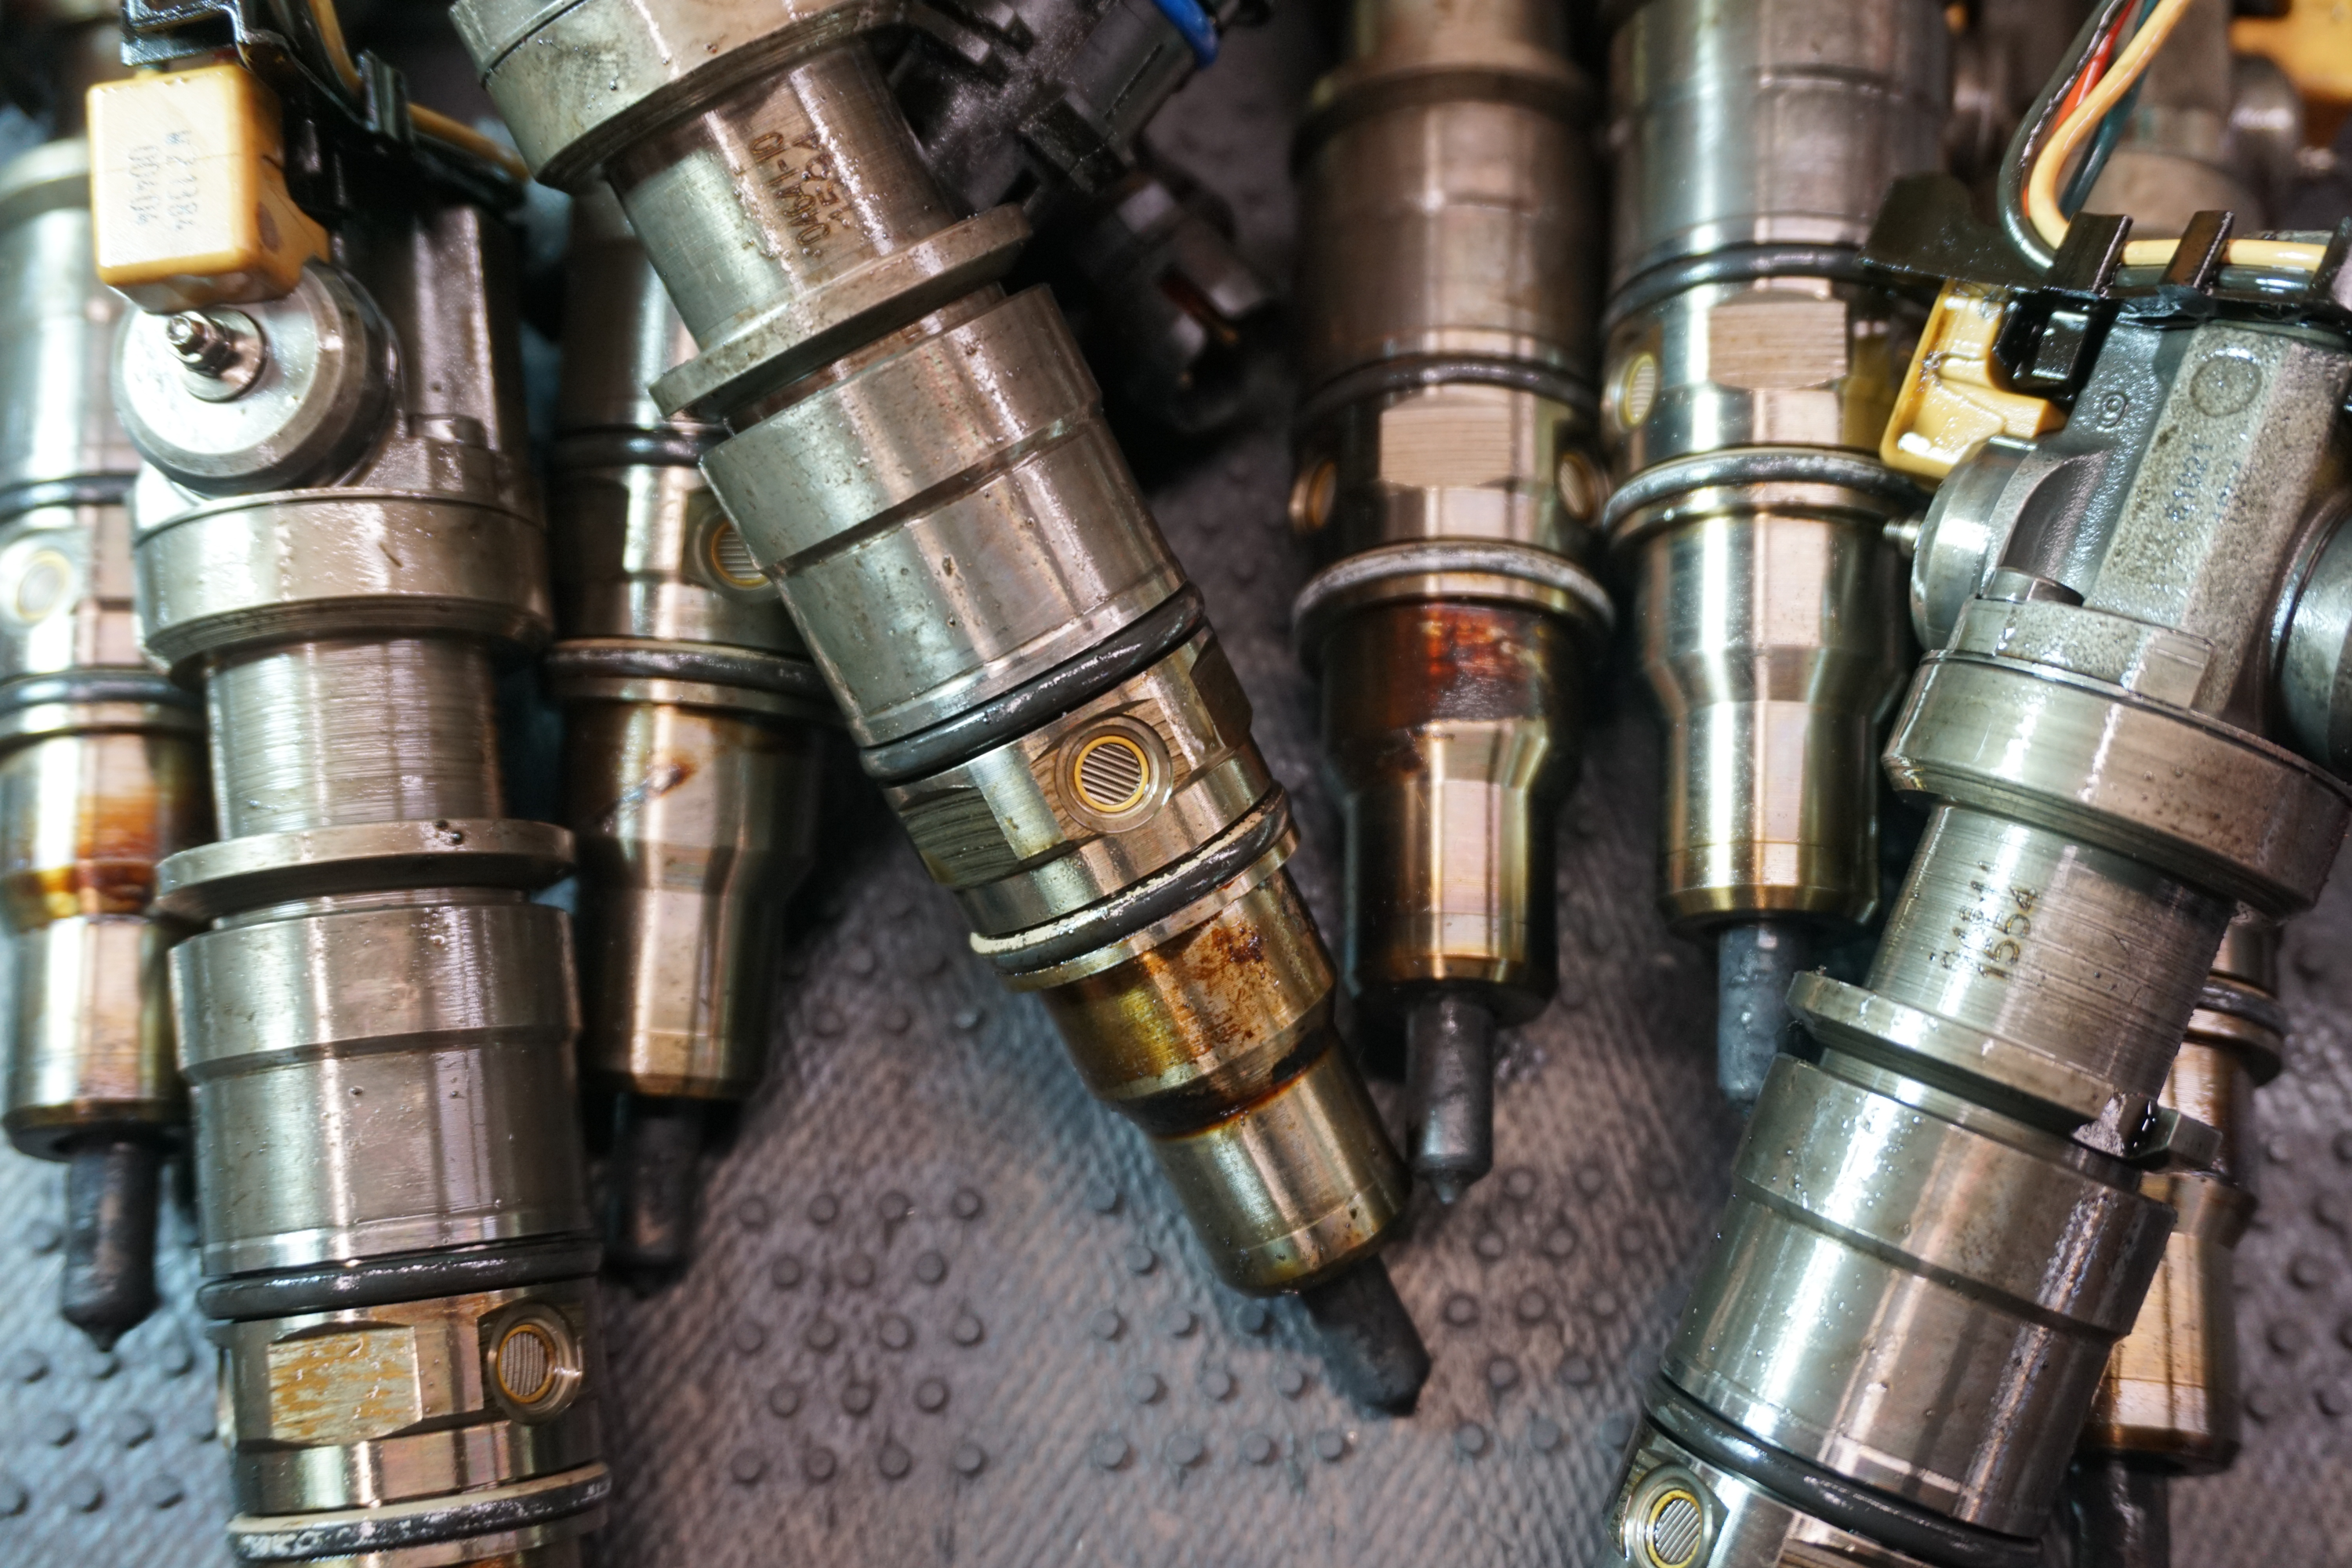 PSA: How bad are your fuel injectors? Get them cleaned!